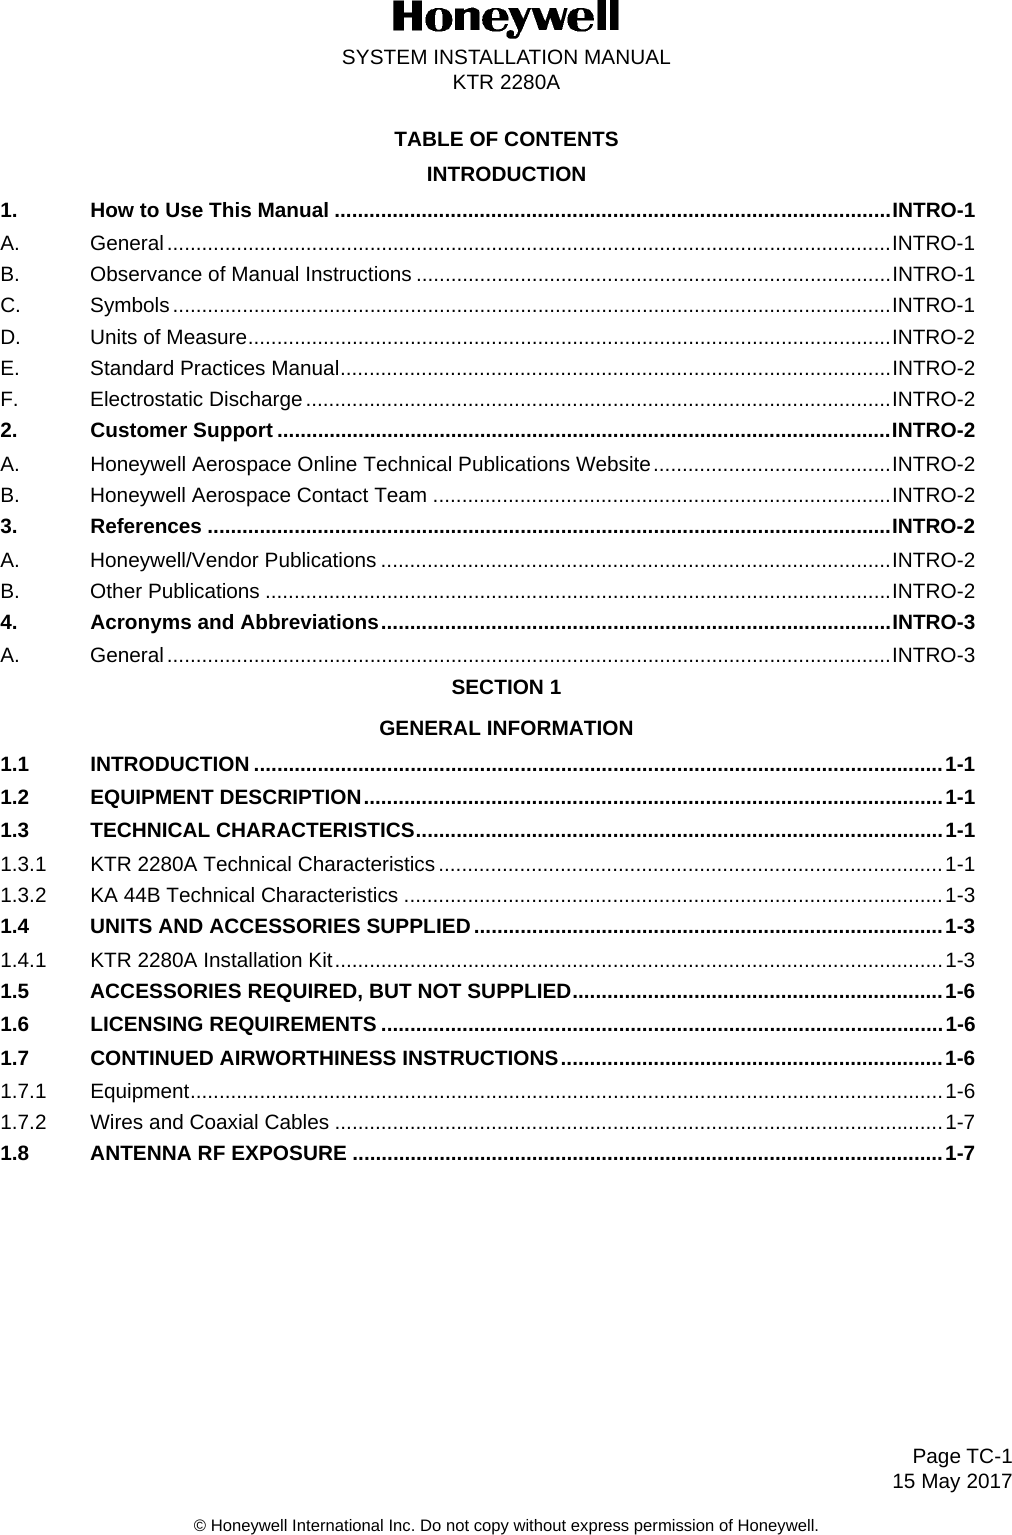 Page TC-115 May 2017SYSTEM INSTALLATION MANUALKTR 2280A© Honeywell International Inc. Do not copy without express permission of Honeywell.TABLE OF CONTENTSINTRODUCTION1. How to Use This Manual ................................................................................................INTRO-1A. General.............................................................................................................................INTRO-1B. Observance of Manual Instructions ..................................................................................INTRO-1C. Symbols............................................................................................................................INTRO-1D. Units of Measure...............................................................................................................INTRO-2E. Standard Practices Manual...............................................................................................INTRO-2F. Electrostatic Discharge .....................................................................................................INTRO-22. Customer Support ..........................................................................................................INTRO-2A. Honeywell Aerospace Online Technical Publications Website.........................................INTRO-2B. Honeywell Aerospace Contact Team ...............................................................................INTRO-23. References ......................................................................................................................INTRO-2A. Honeywell/Vendor Publications ........................................................................................INTRO-2B. Other Publications ............................................................................................................INTRO-24. Acronyms and Abbreviations........................................................................................INTRO-3A. General.............................................................................................................................INTRO-3SECTION 1GENERAL INFORMATION1.1 INTRODUCTION .......................................................................................................................1-11.2 EQUIPMENT DESCRIPTION....................................................................................................1-11.3 TECHNICAL CHARACTERISTICS...........................................................................................1-11.3.1 KTR 2280A Technical Characteristics .......................................................................................1-11.3.2 KA 44B Technical Characteristics .............................................................................................1-31.4 UNITS AND ACCESSORIES SUPPLIED.................................................................................1-31.4.1 KTR 2280A Installation Kit.........................................................................................................1-31.5 ACCESSORIES REQUIRED, BUT NOT SUPPLIED................................................................1-61.6 LICENSING REQUIREMENTS .................................................................................................1-61.7 CONTINUED AIRWORTHINESS INSTRUCTIONS..................................................................1-61.7.1 Equipment..................................................................................................................................1-61.7.2 Wires and Coaxial Cables .........................................................................................................1-71.8 ANTENNA RF EXPOSURE ......................................................................................................1-7